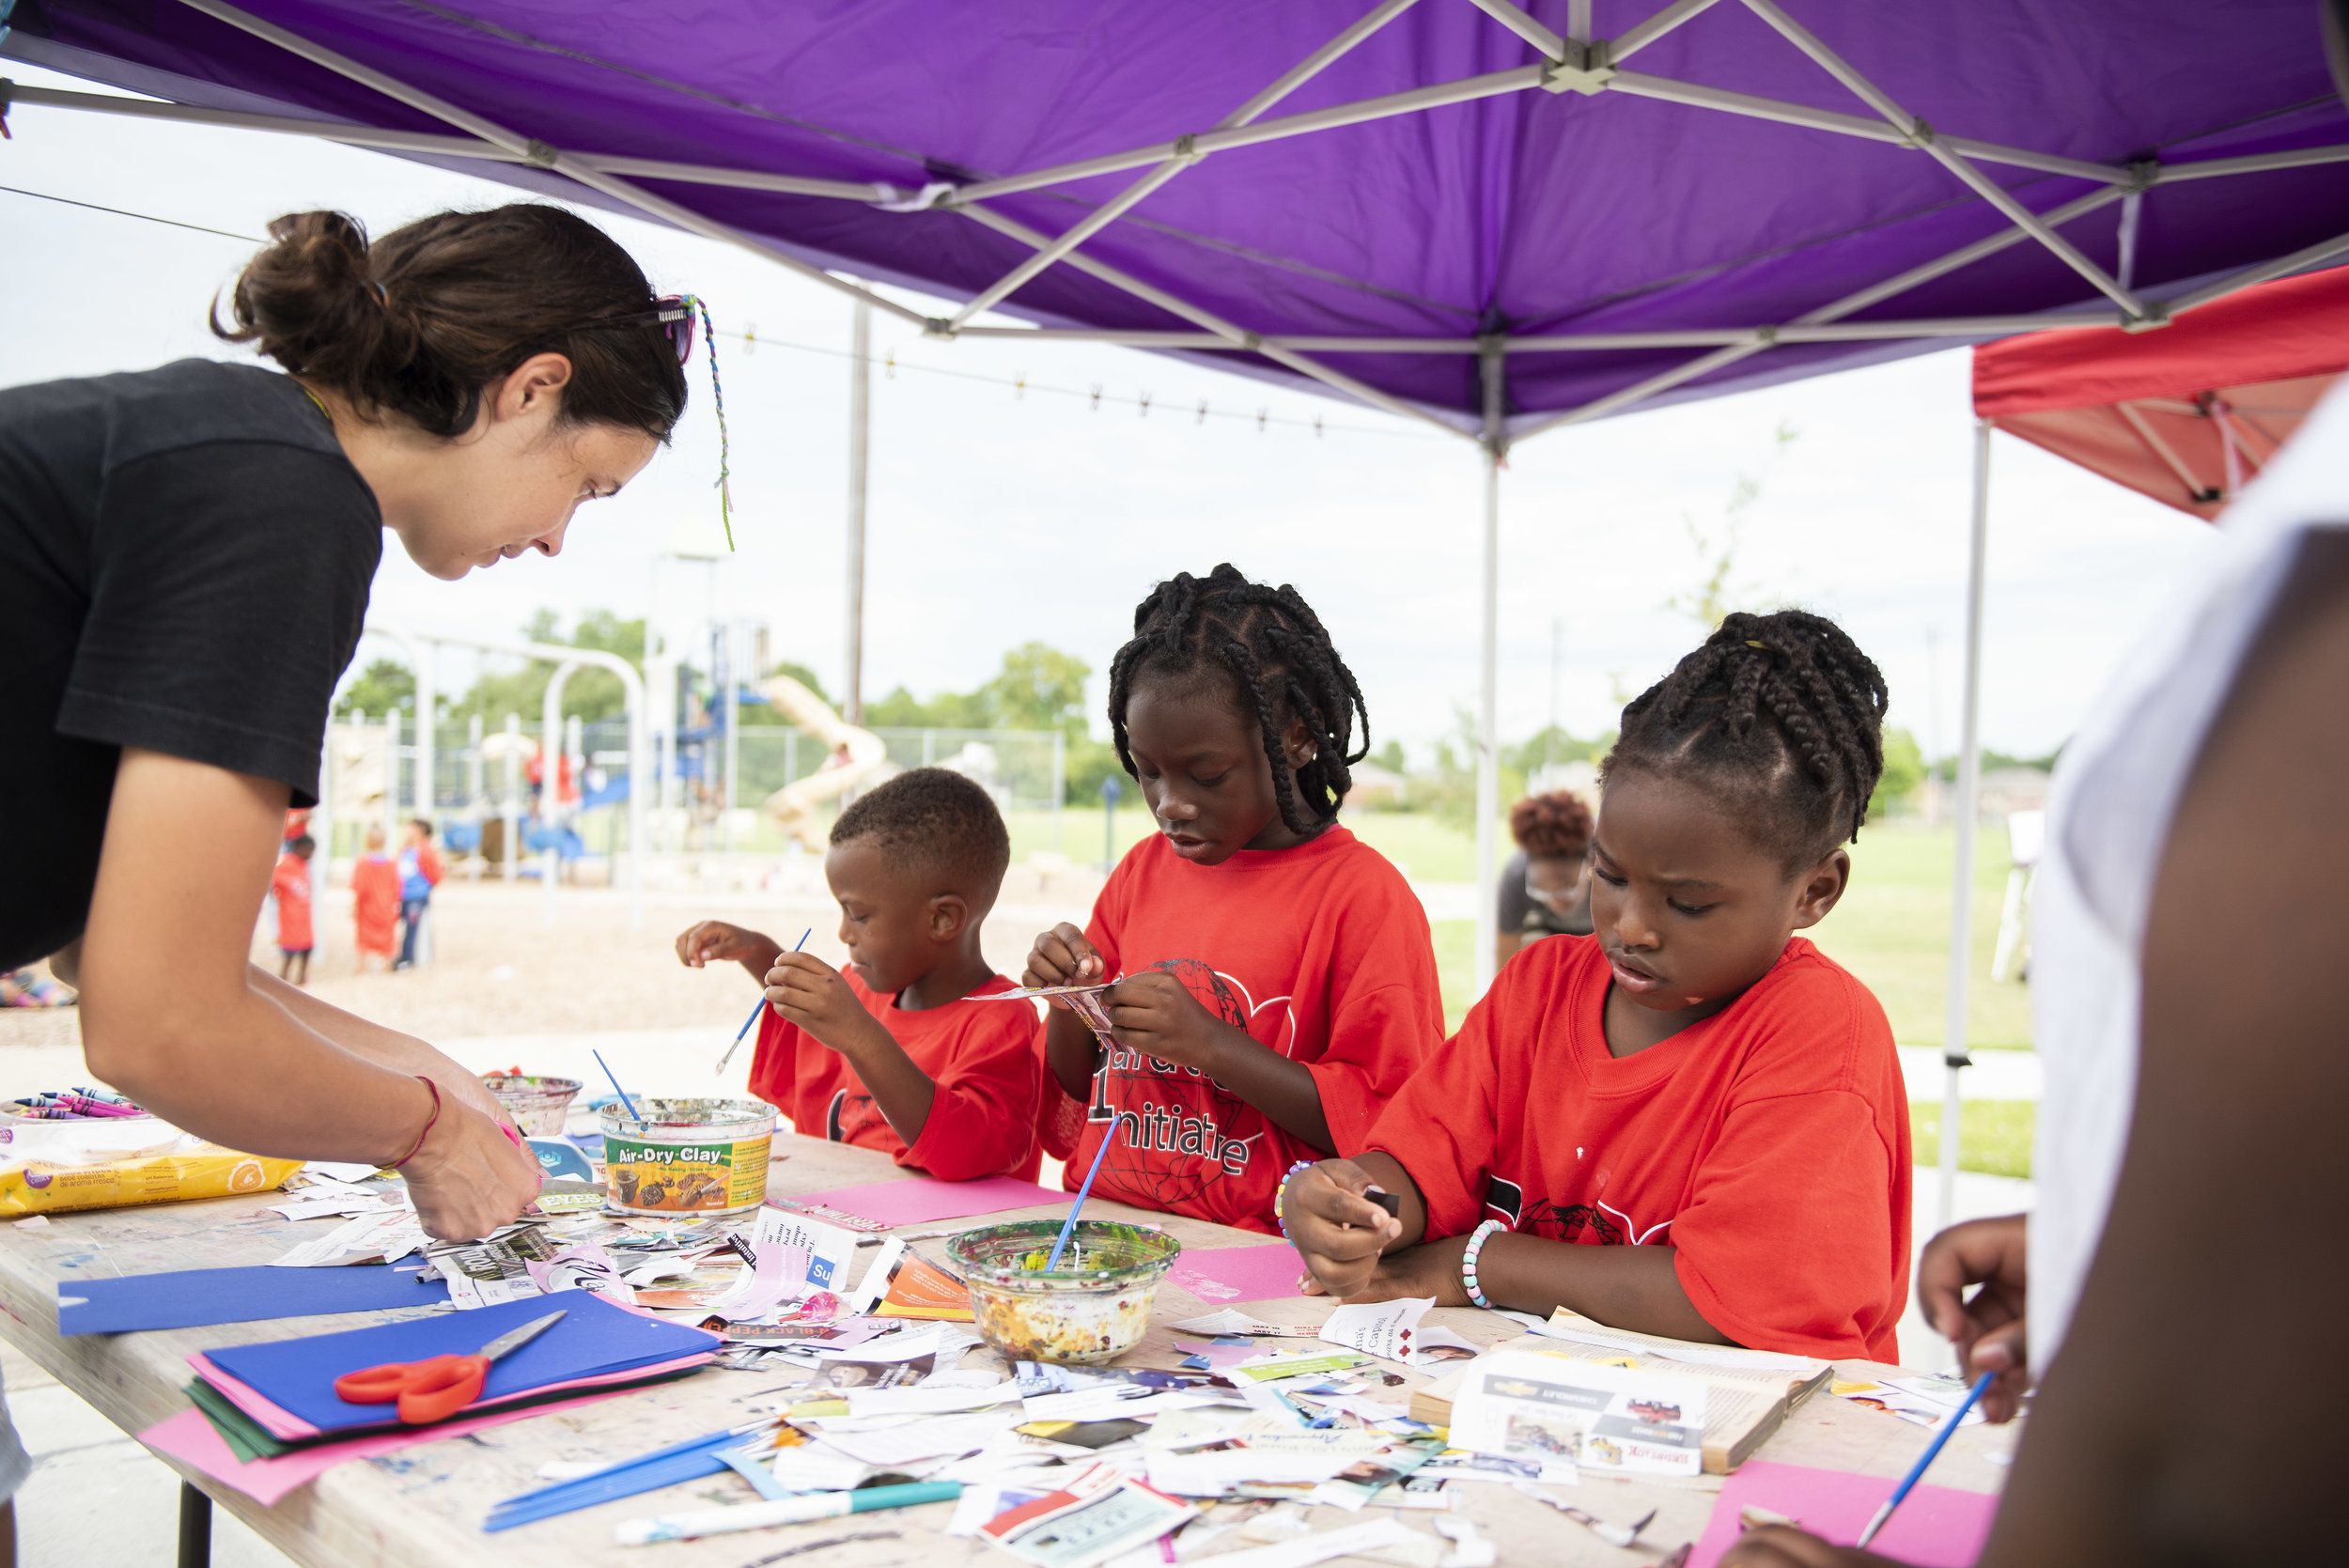 NAP assistant, Samantha Combs, helps kids with art activities.